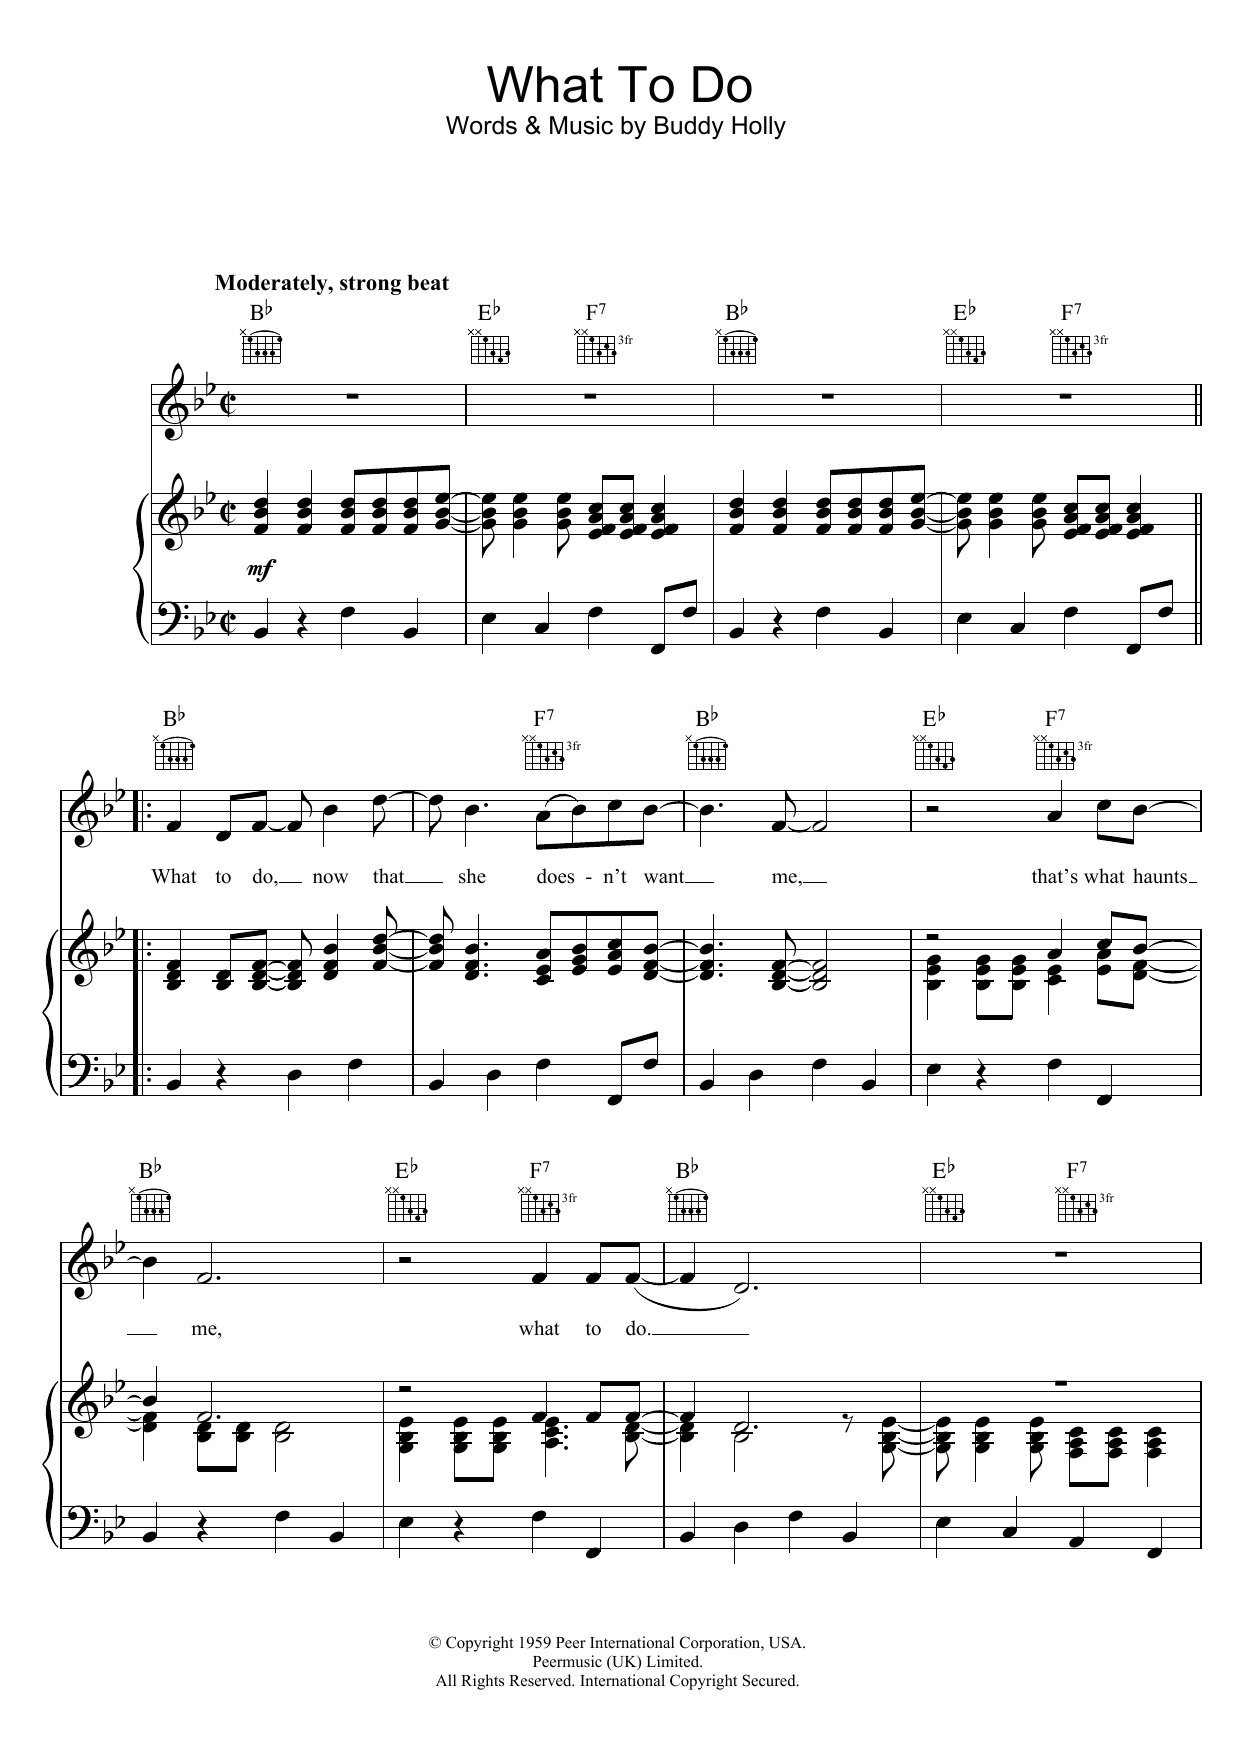 Download Buddy Holly What To Do Sheet Music